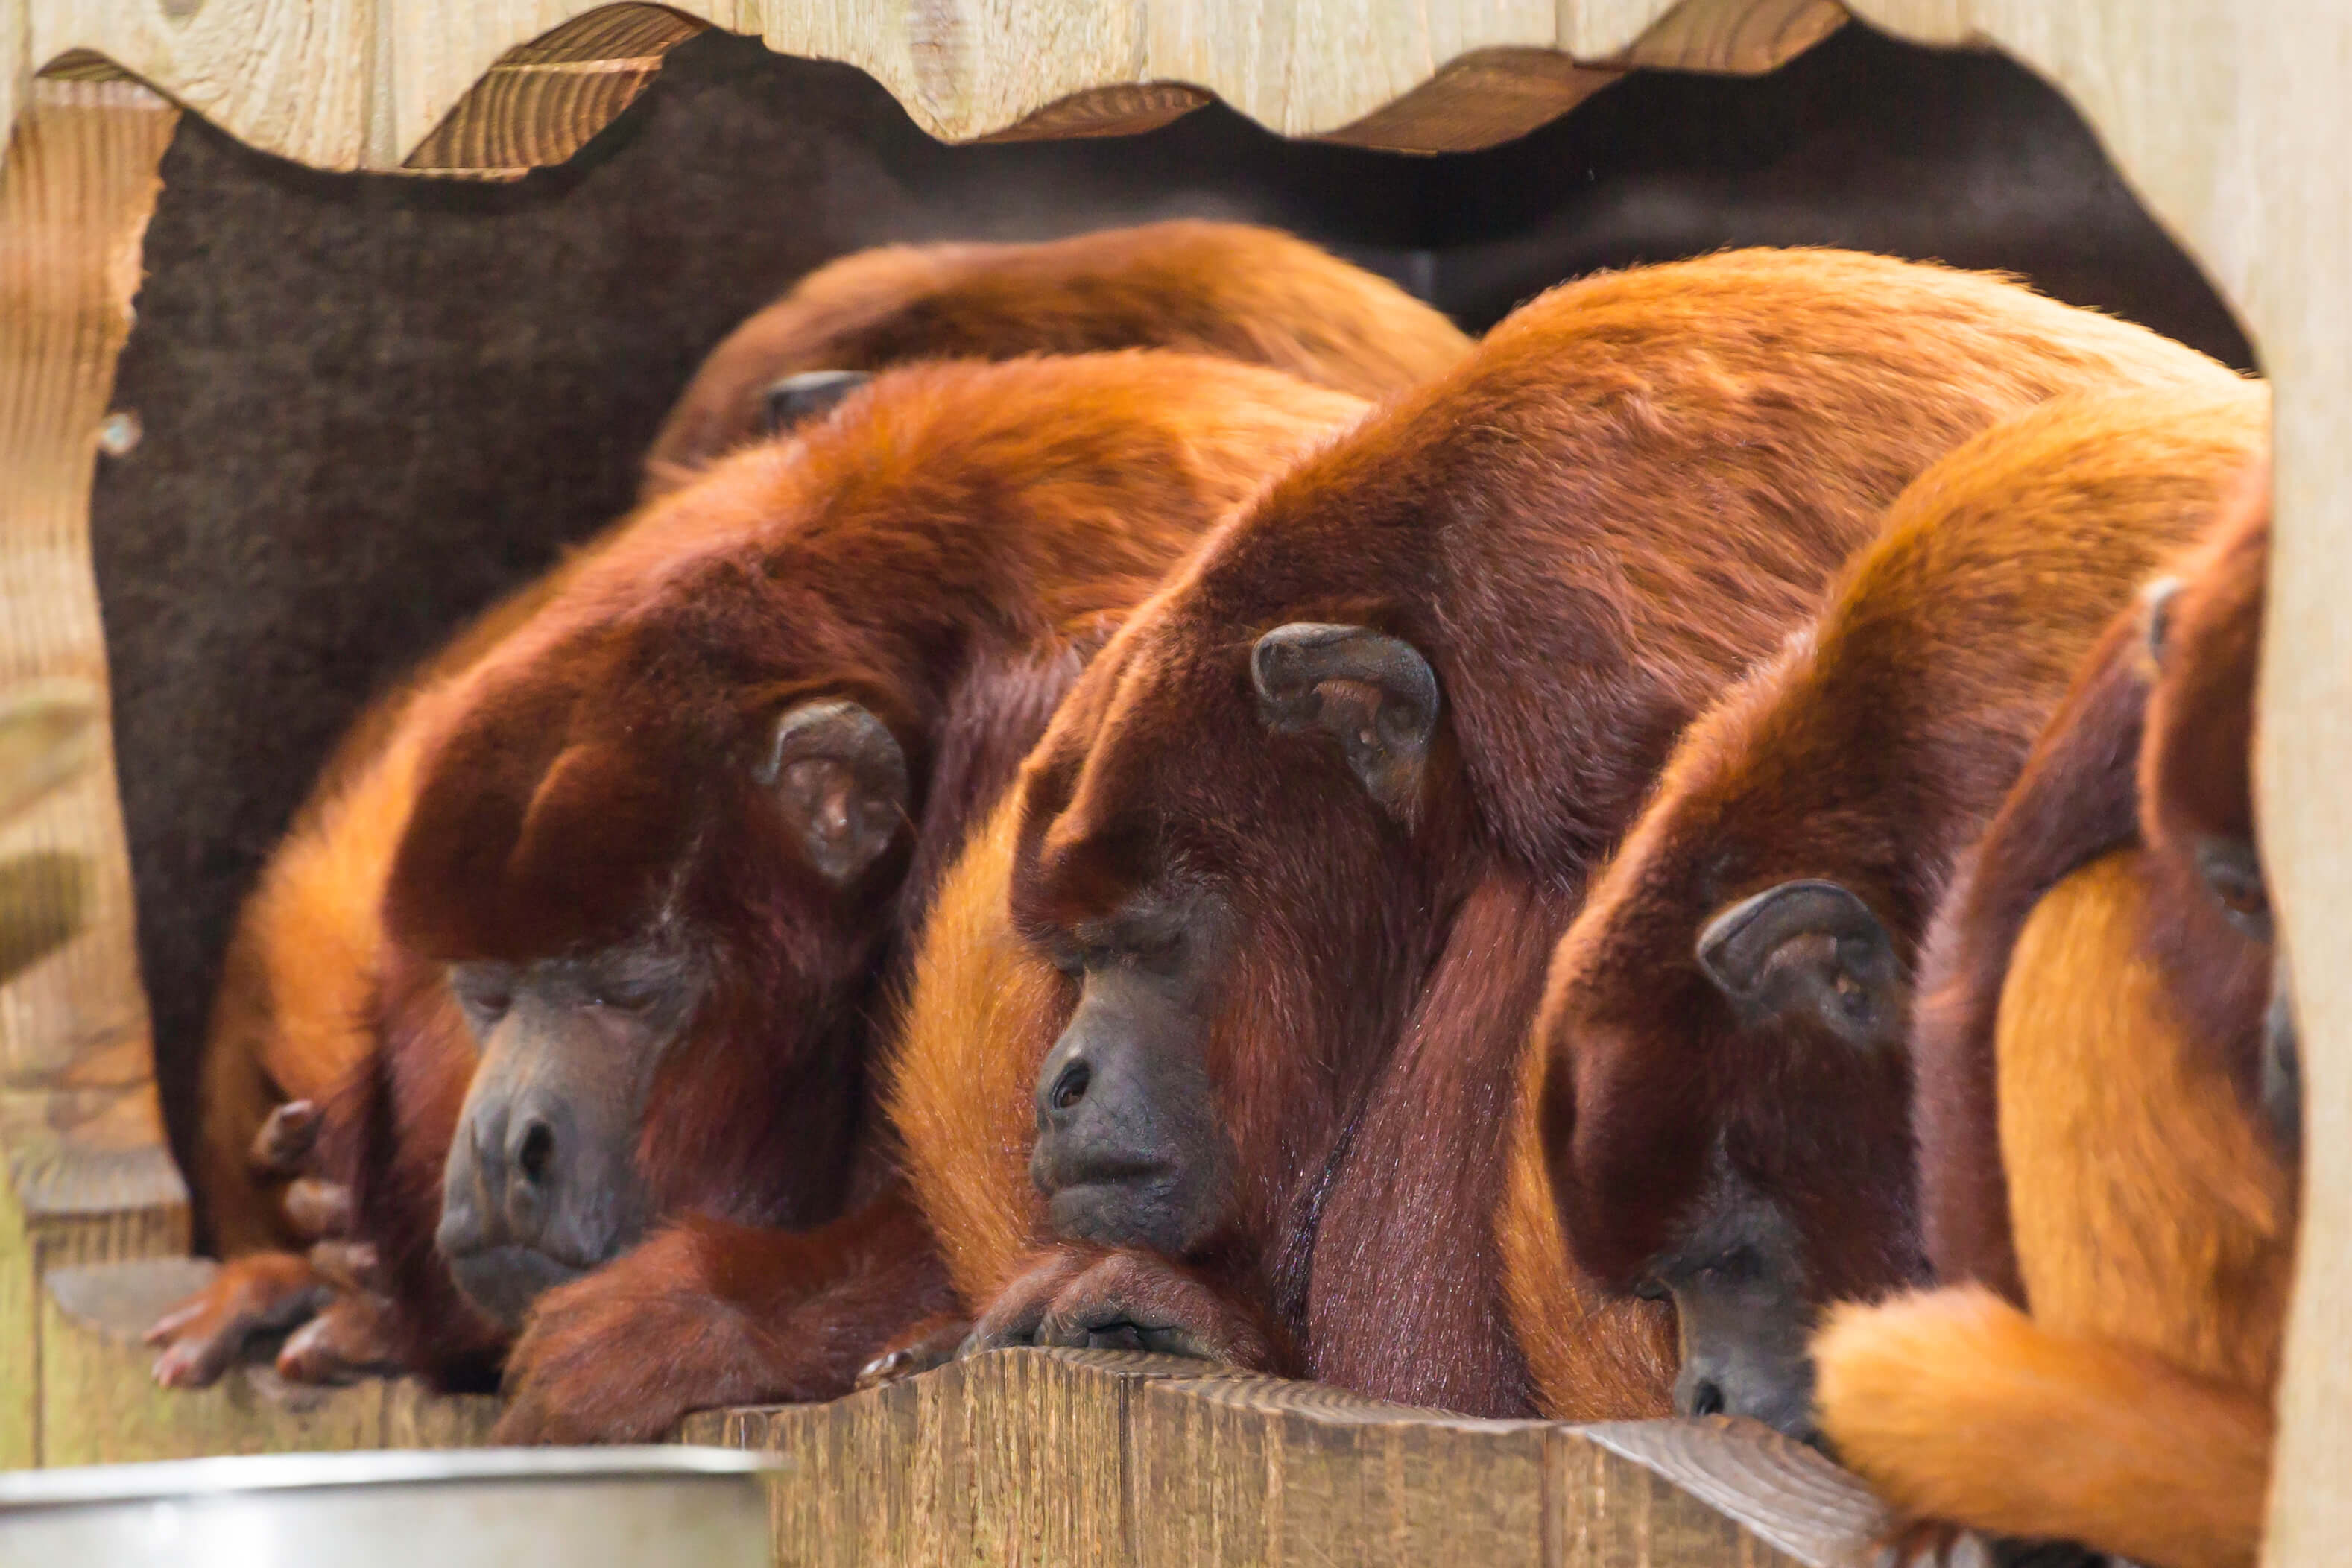 A row of five howler monkeys huddled together while sleeping